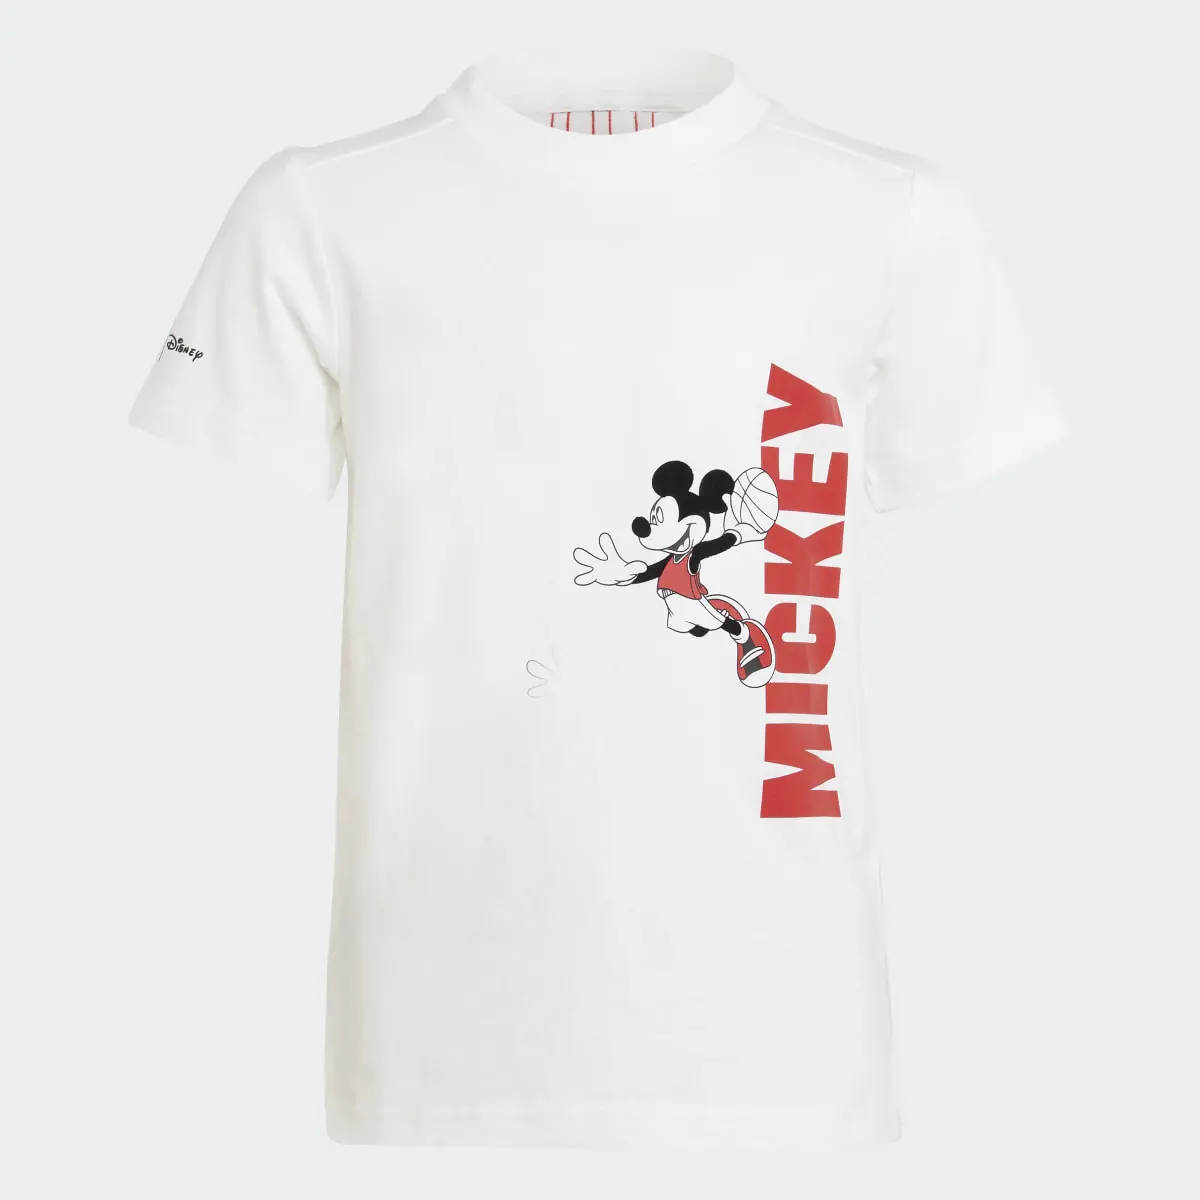 Adidas Completo Disney Mickey Mouse Summer. 2